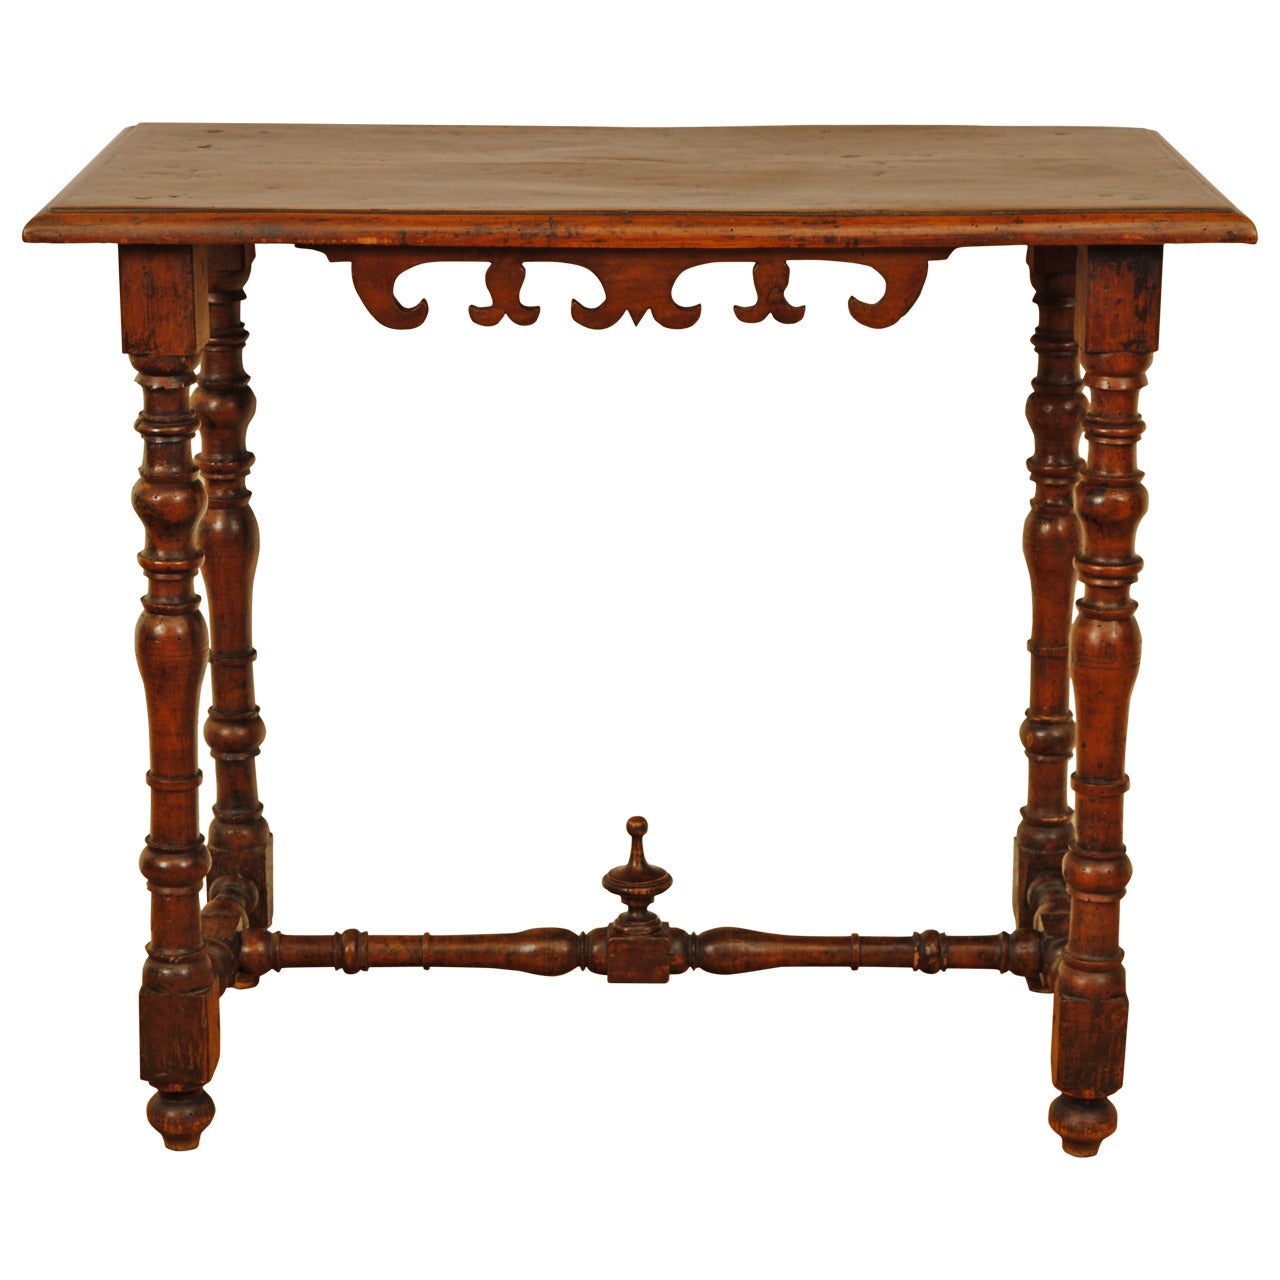 Italian Early 18th Century Turned and Carved Walnut Console Table